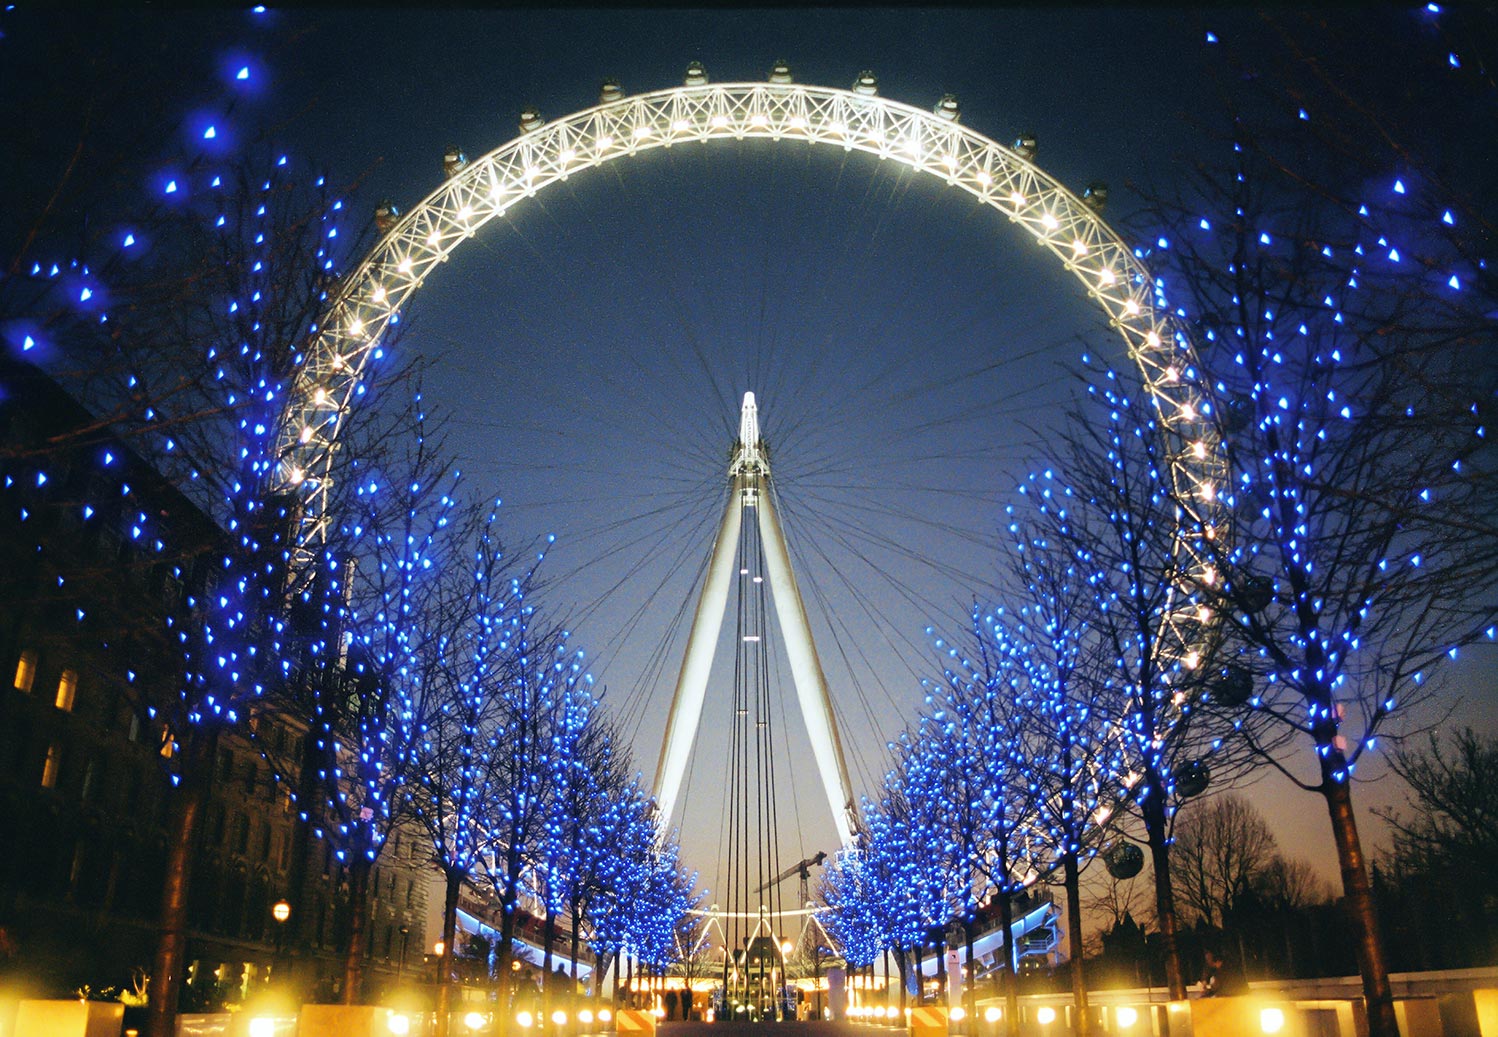 The illuminated London Eye at night, taken the year after it opened from a low viewpoint beyond the Blue lit trees in Jubilee Gardens